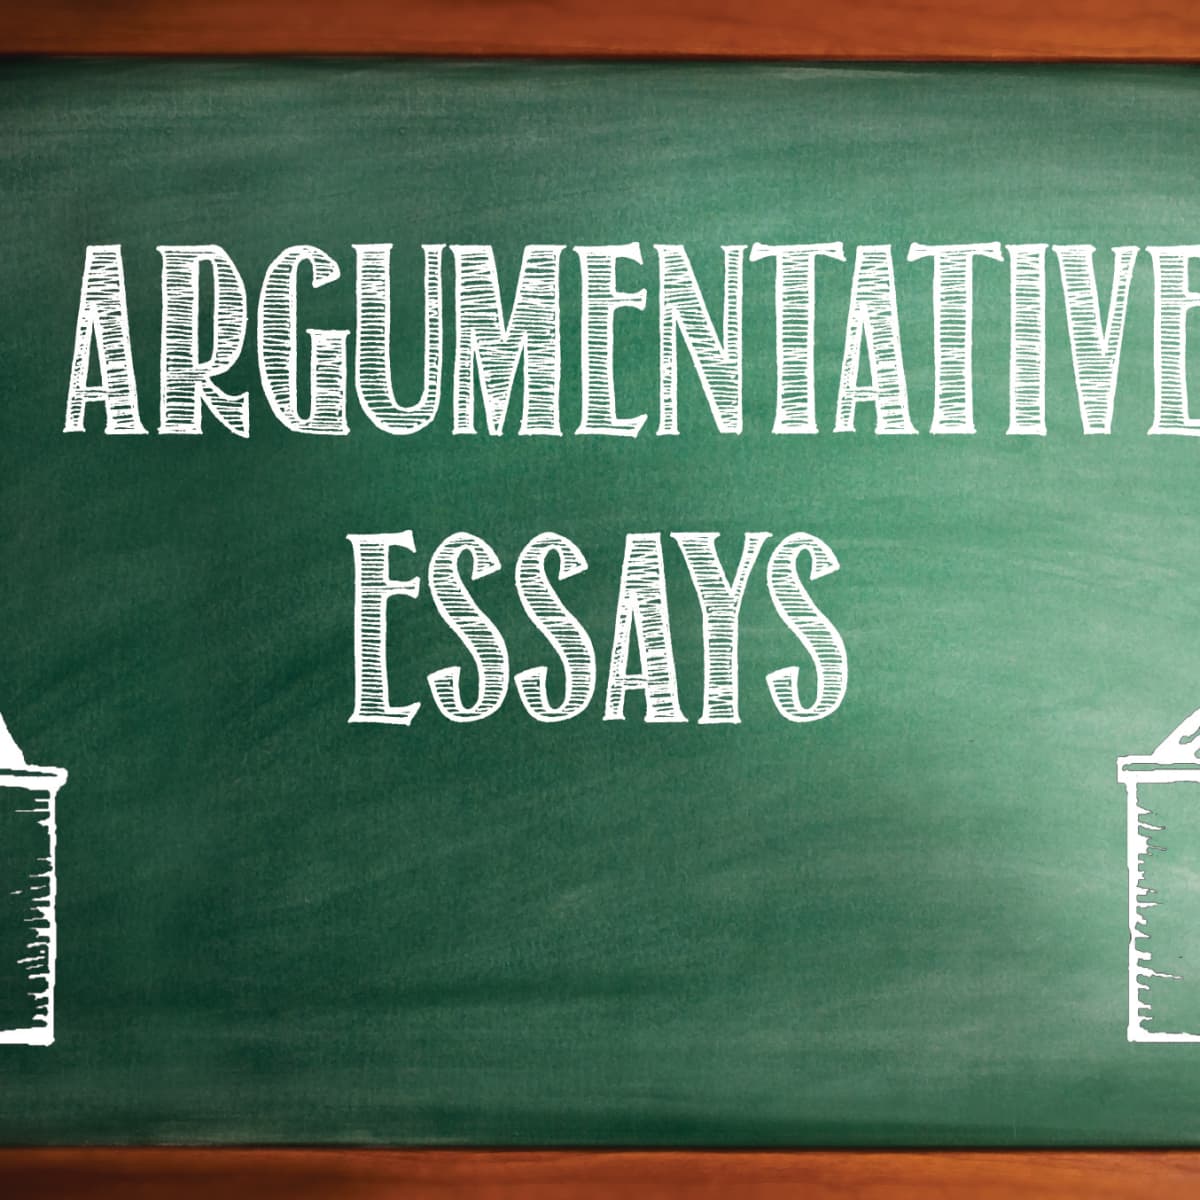 which is a step in writing an argumentative speech